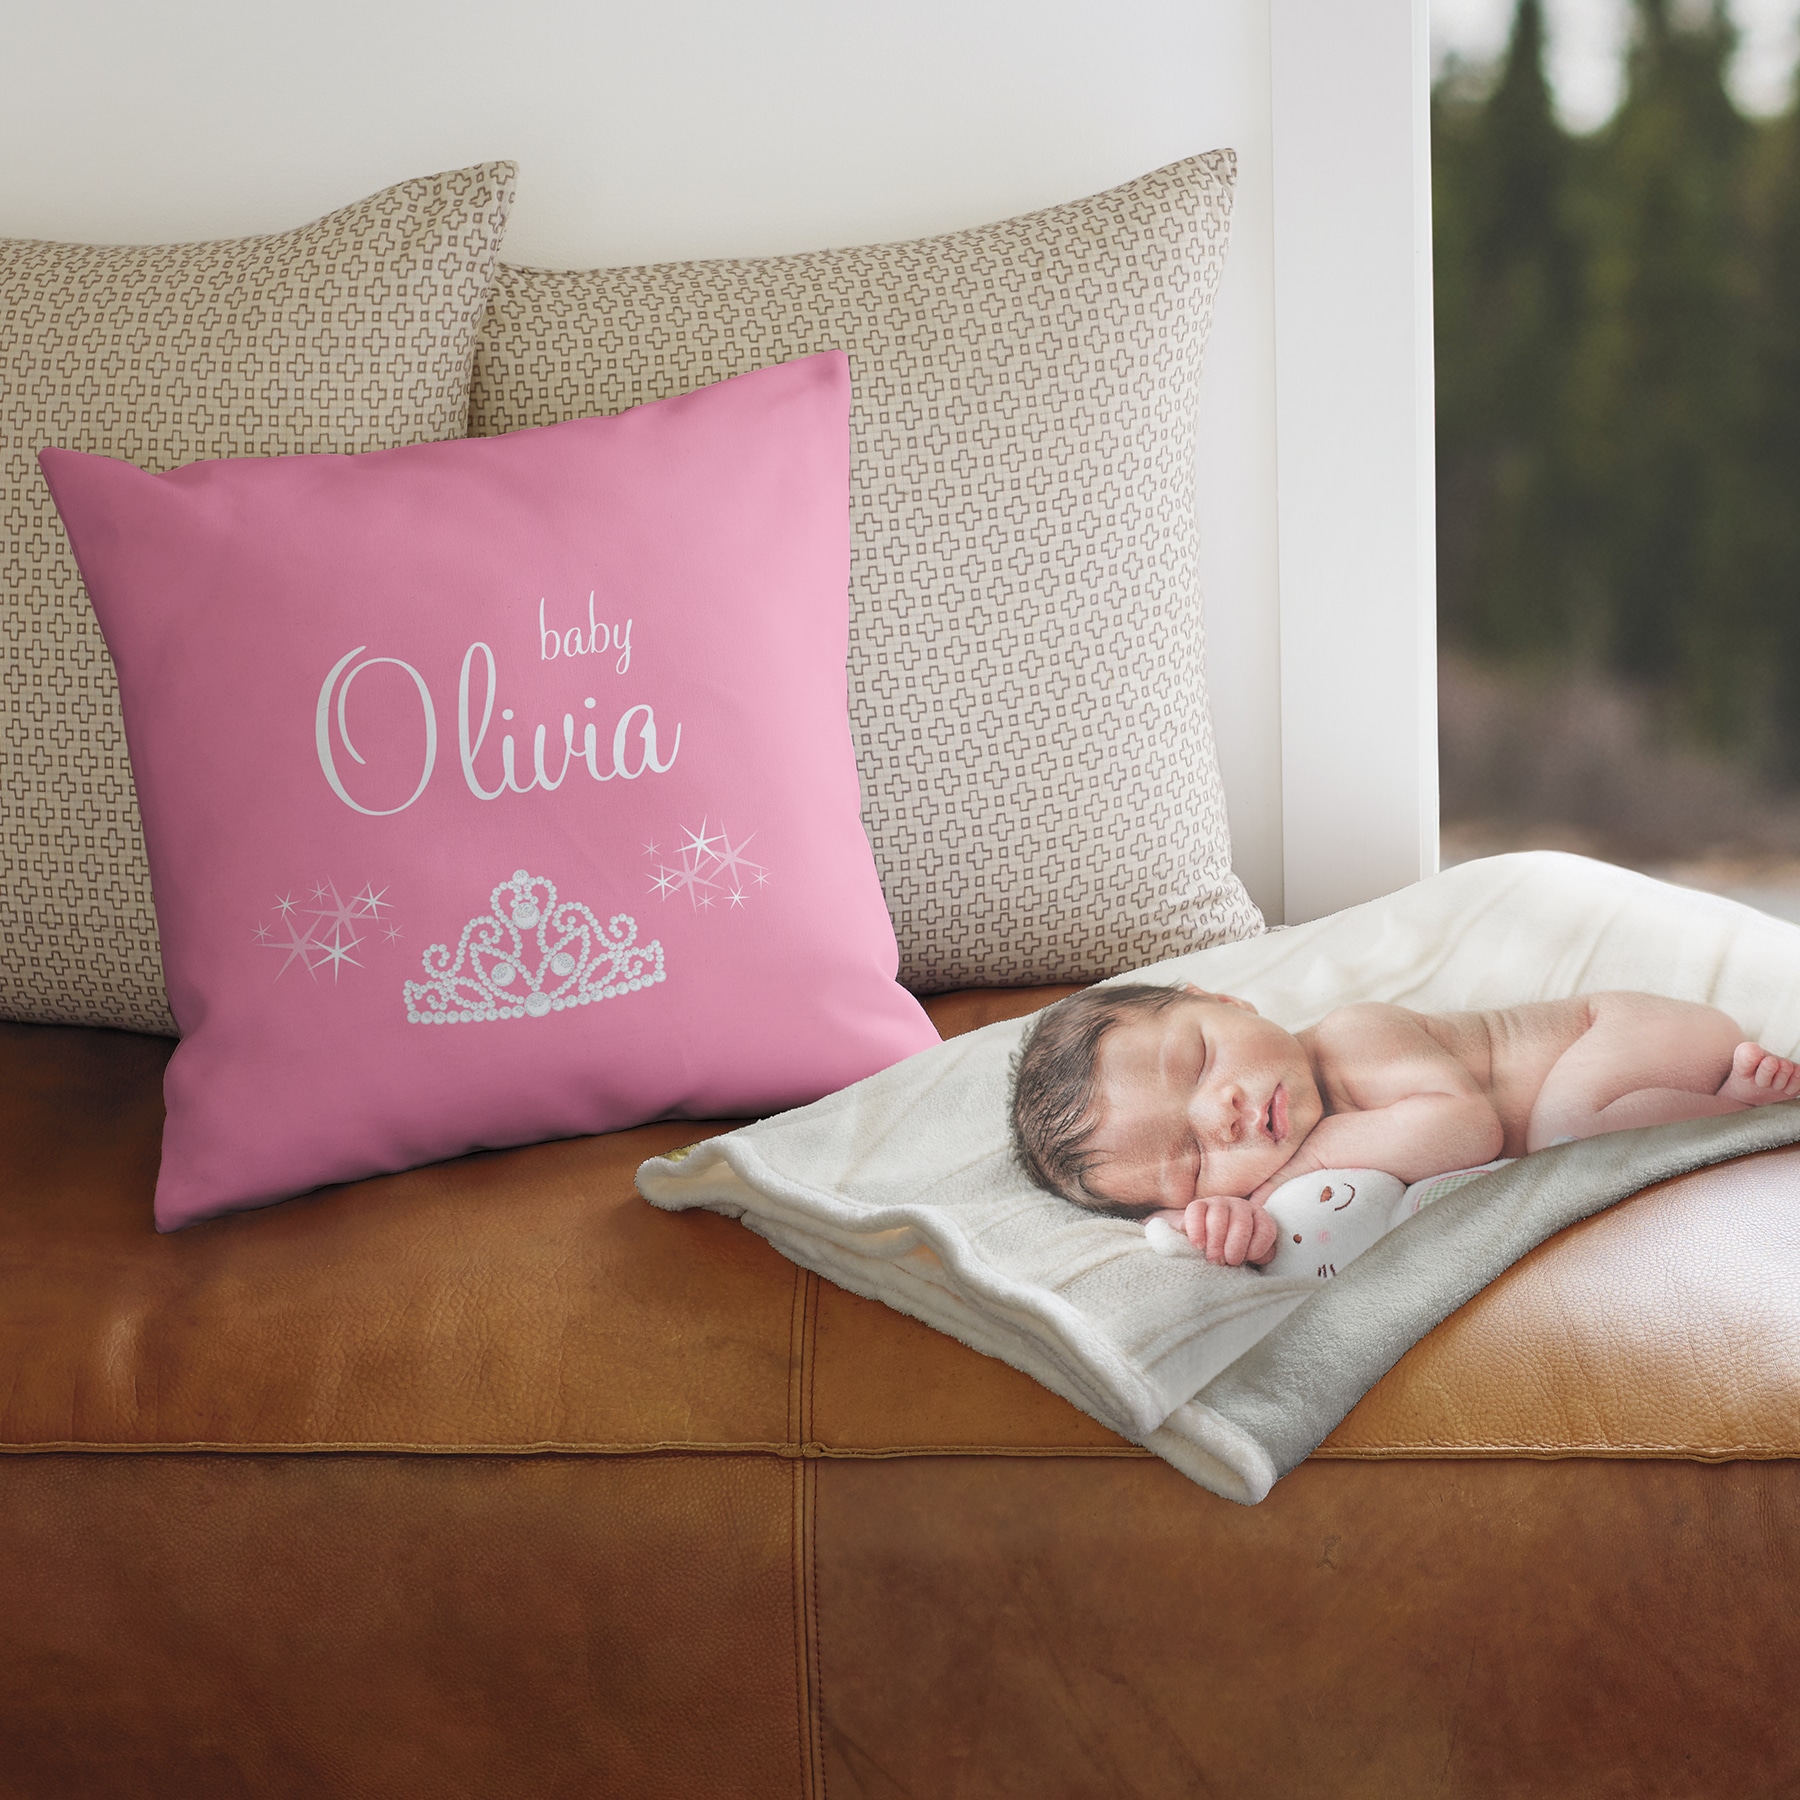 Nursery Décor + Gifts fit for any Prince or Princess